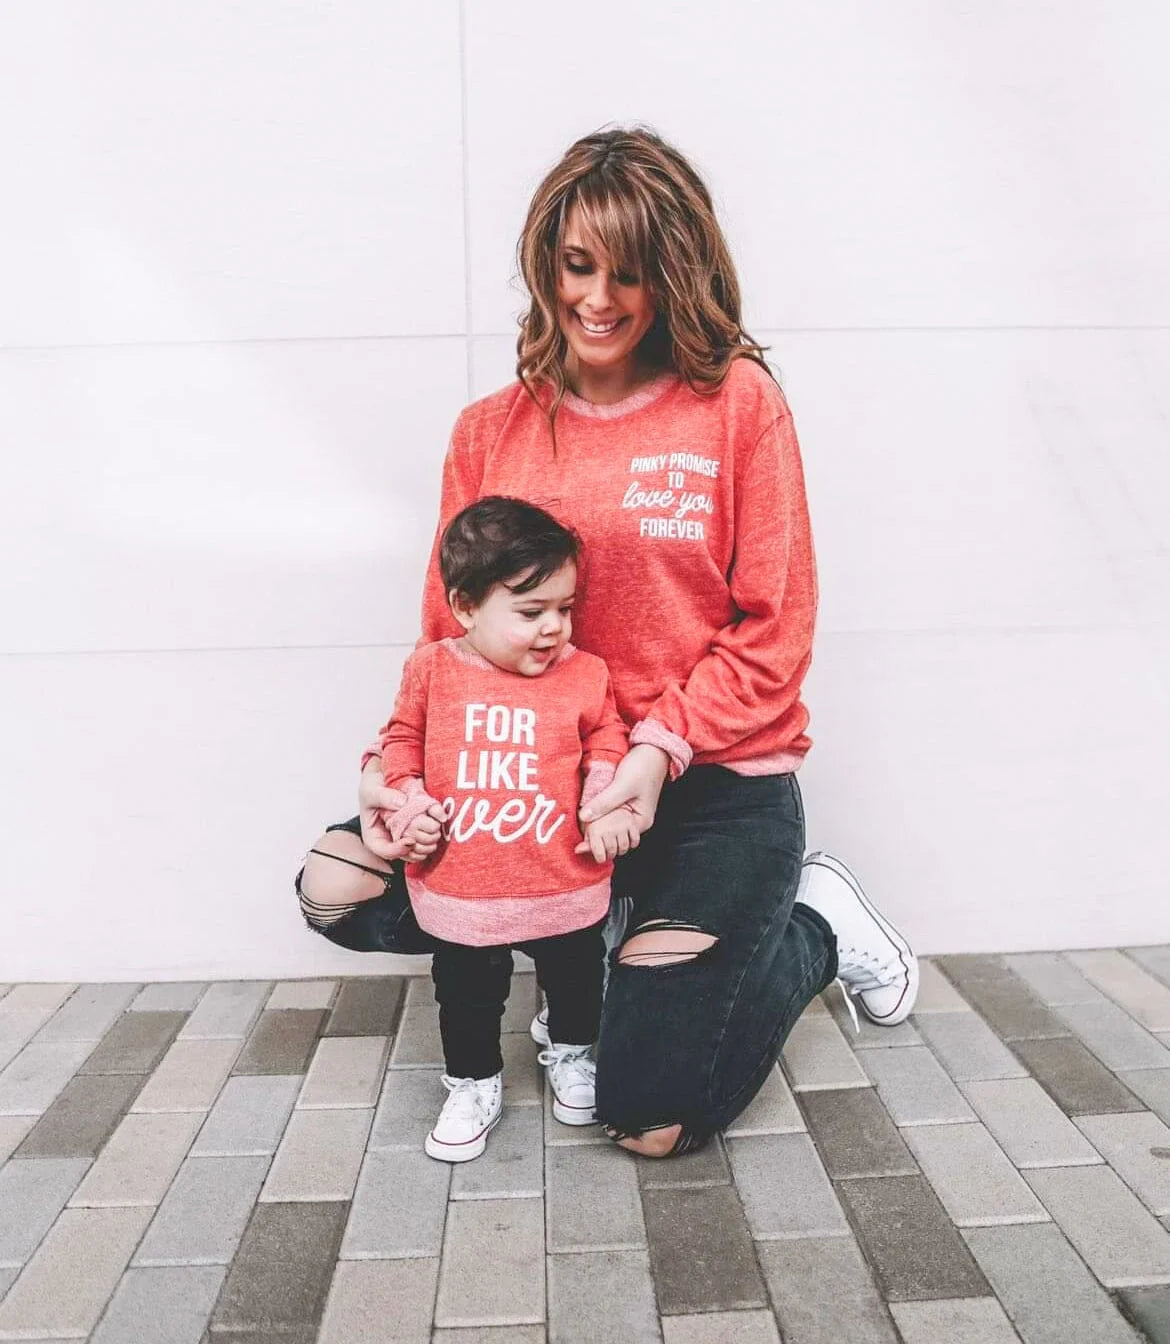 A mom and her toddler wearing matching red sweatshirts